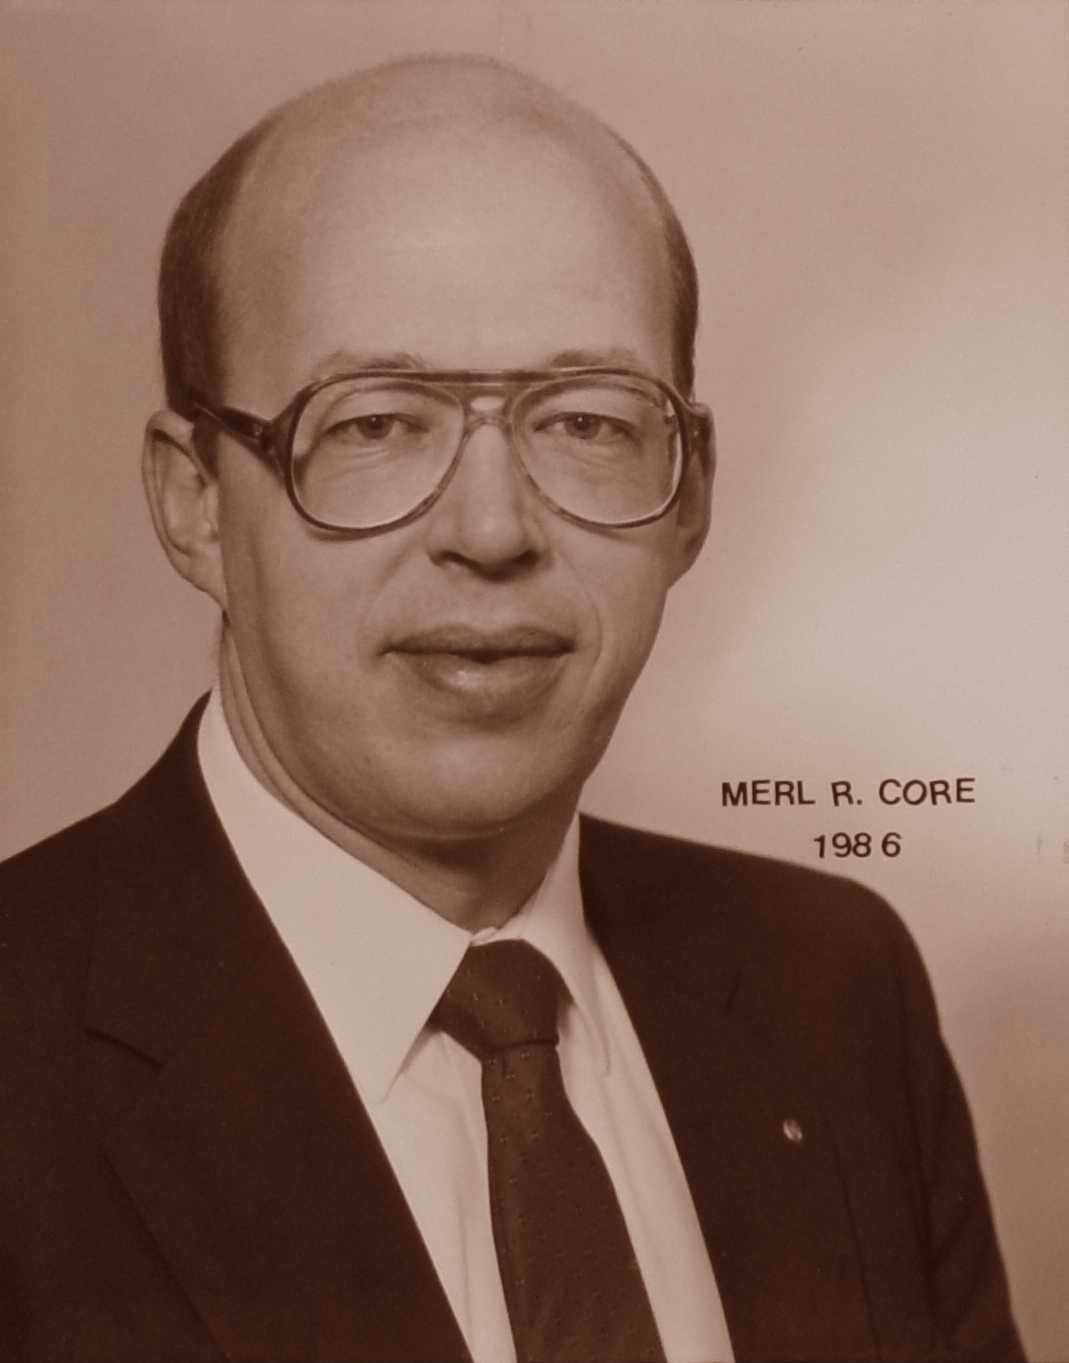 Merl R. Core, 1986